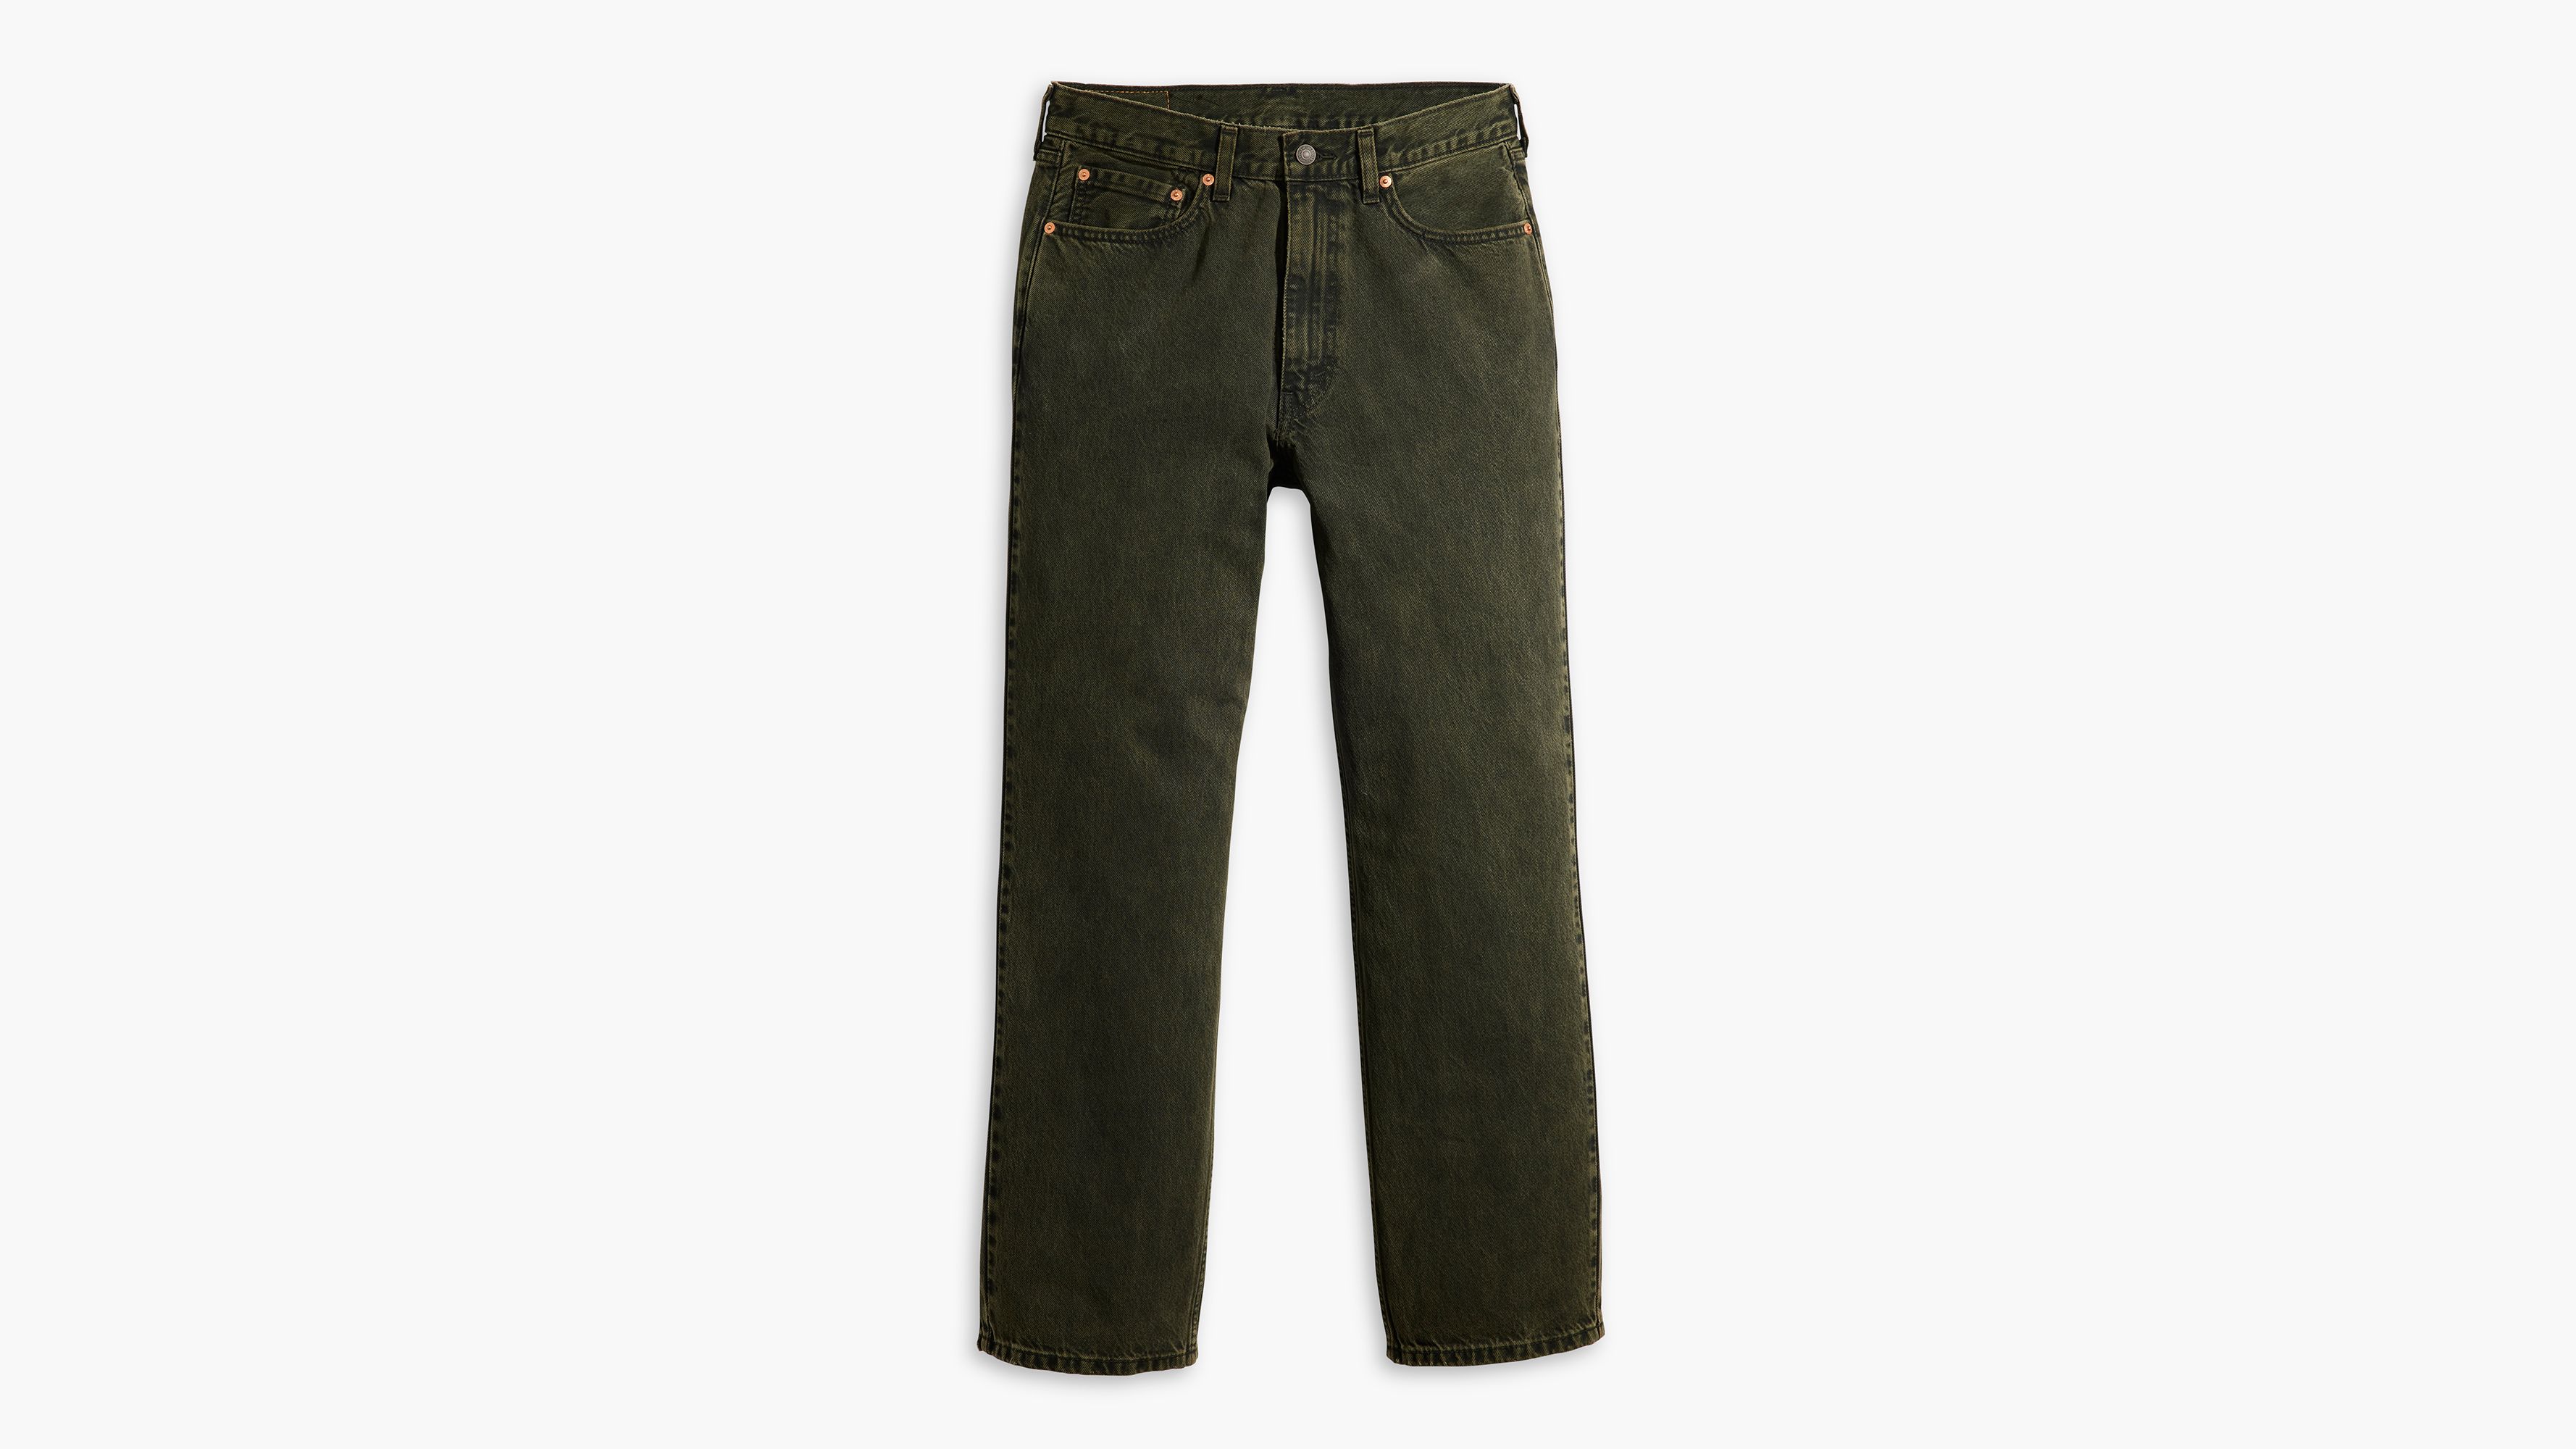 565™ Loose Straight Men's Jeans